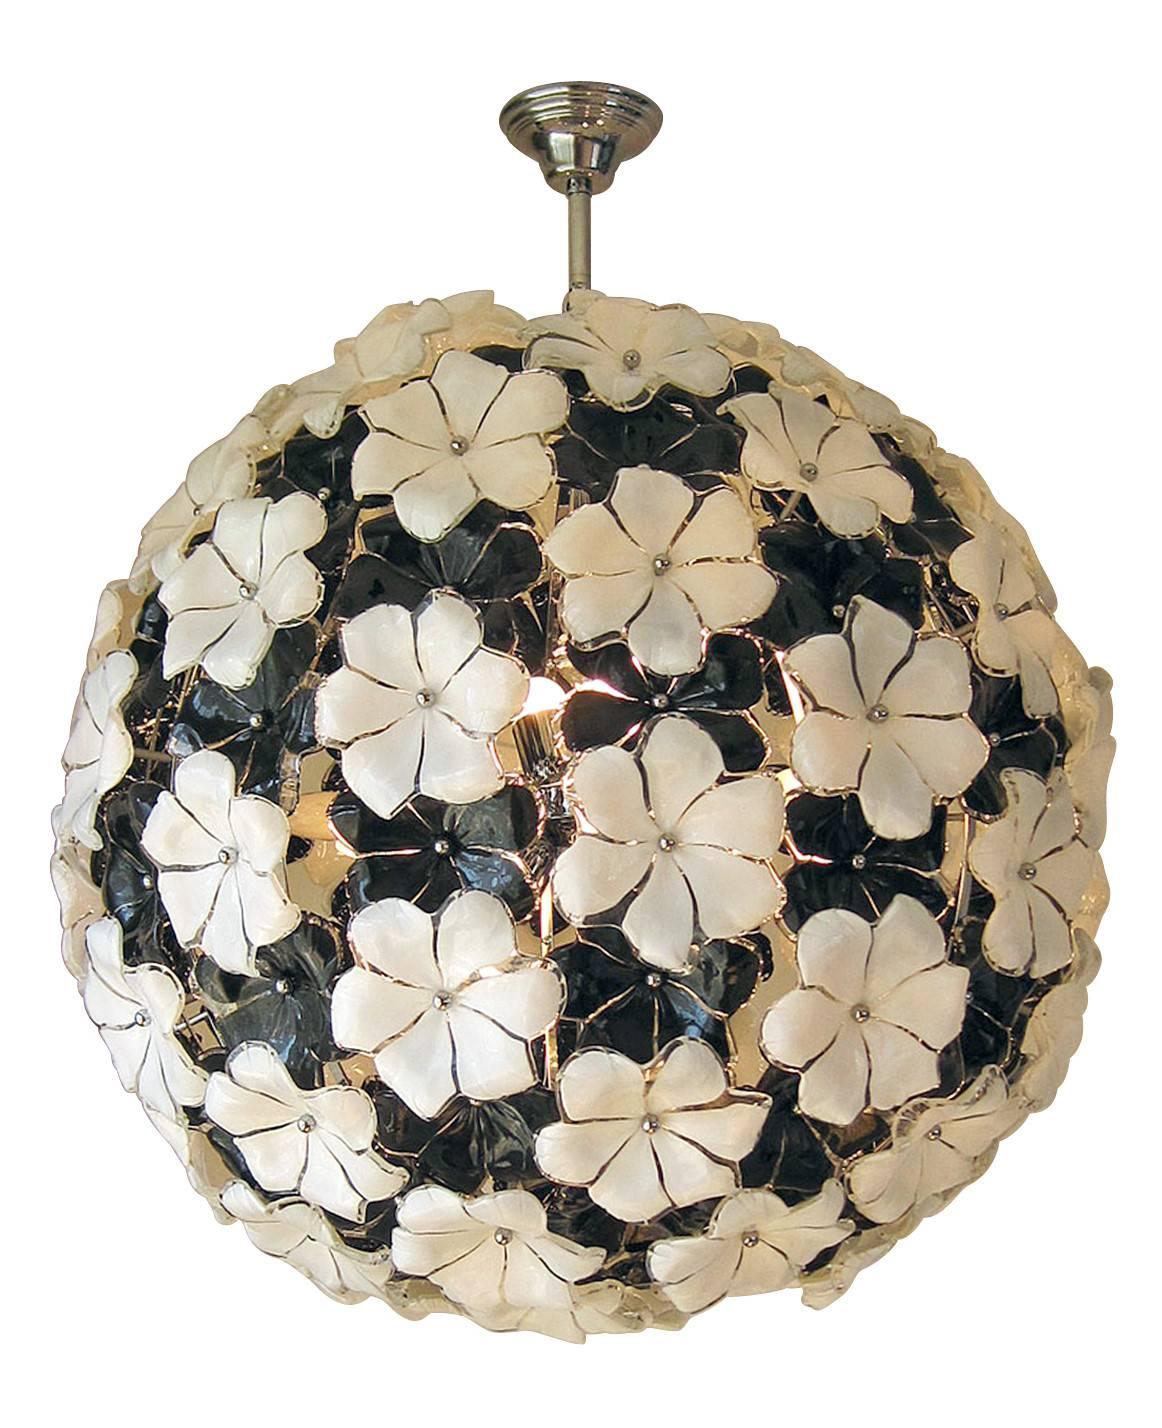 Italian chandelier with 145 unique black and white Murano glass flowers, each individually handblown and mounted on a chrome frame / Designed by Gino Cenedese circa 1970’s / Made in Italy 
12 lights / E26 or E27 type /  max 40W each
Diameter: 31.5